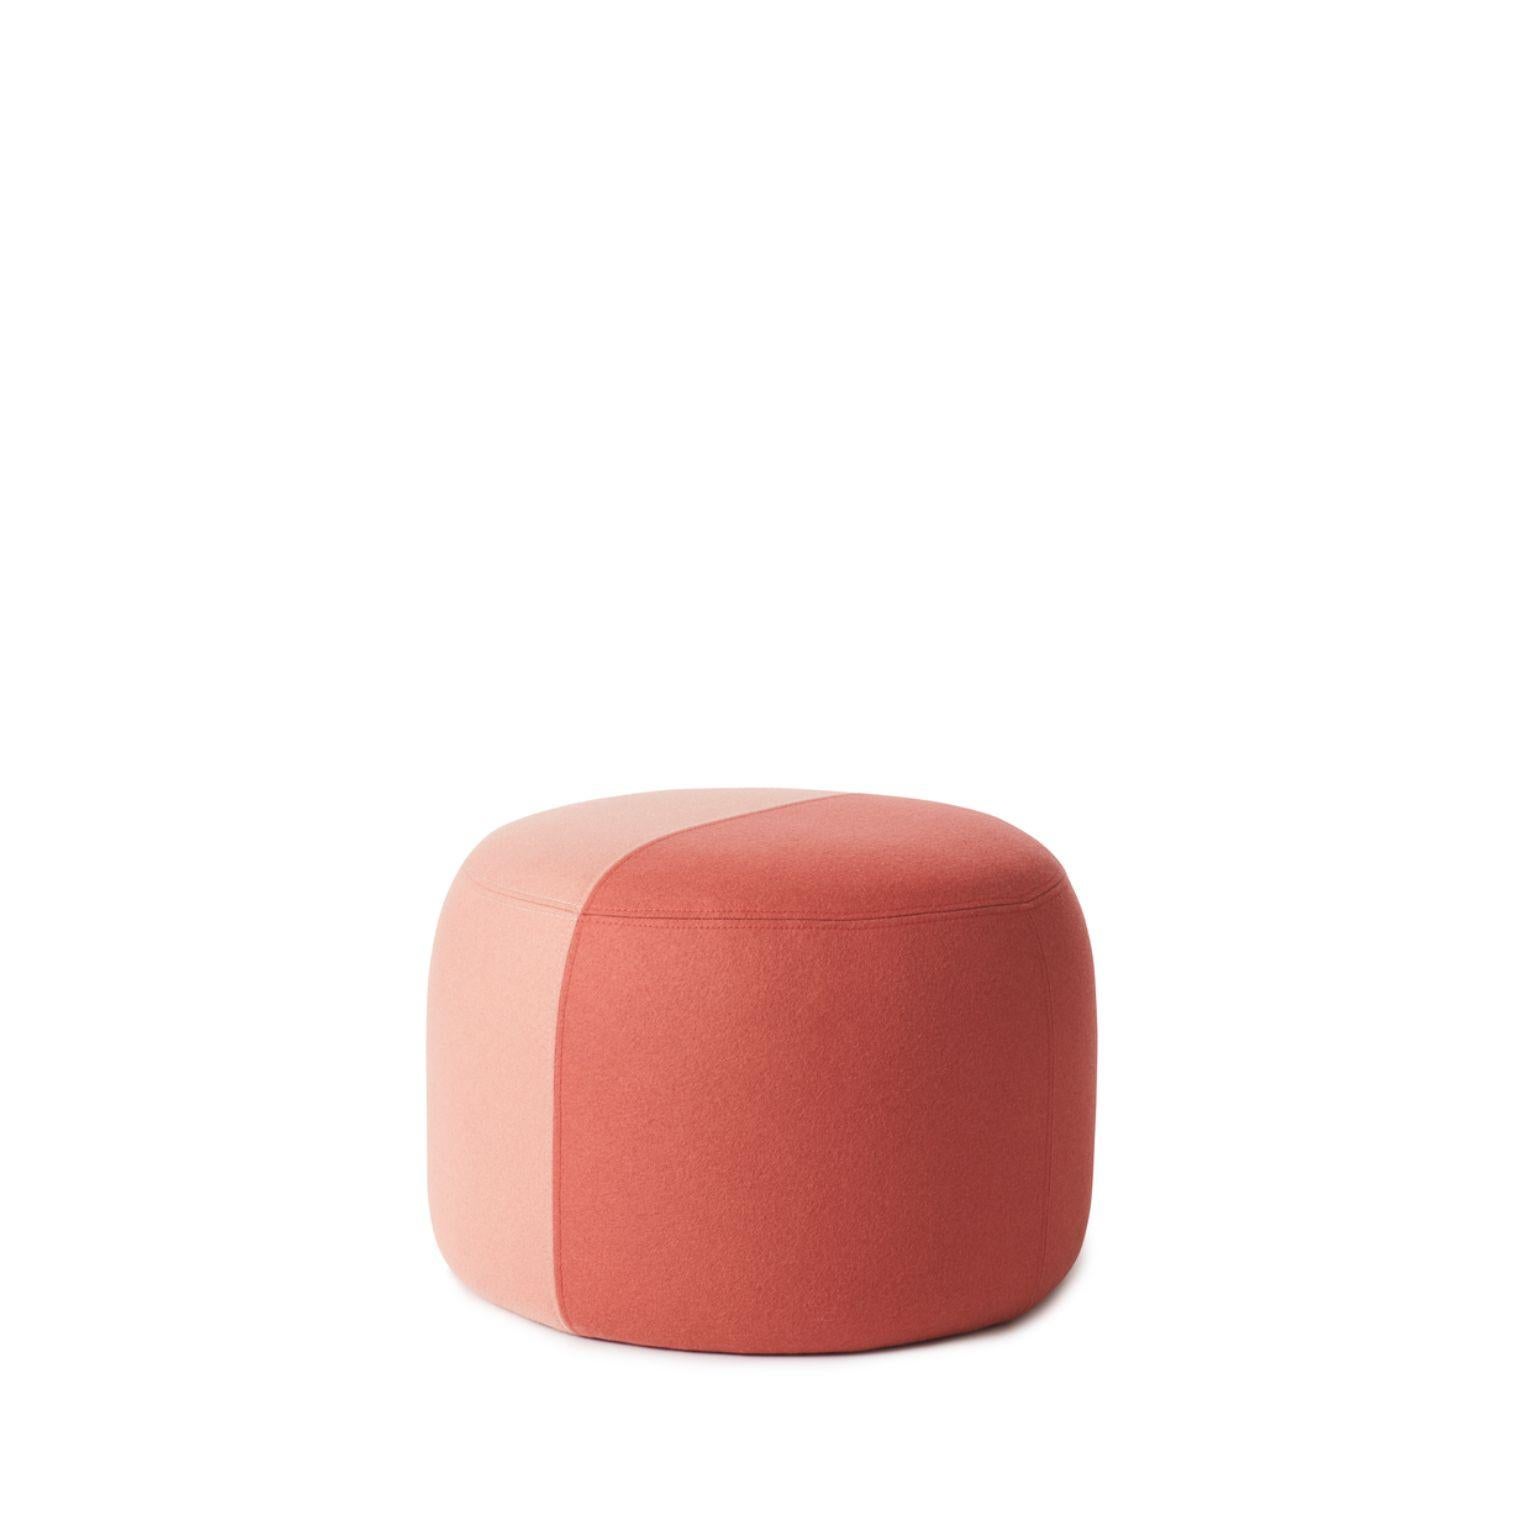 Dainty pouf blush Coral by Warm Nordic
Dimensions: D55 x H 39 cm
Material: Textile upholstery, Wooden frame, foam.
Weight: 9.5 kg
Also available in different colours and finishes. 

Sophisticated, two-coloured pouf with soft shapes and a clean